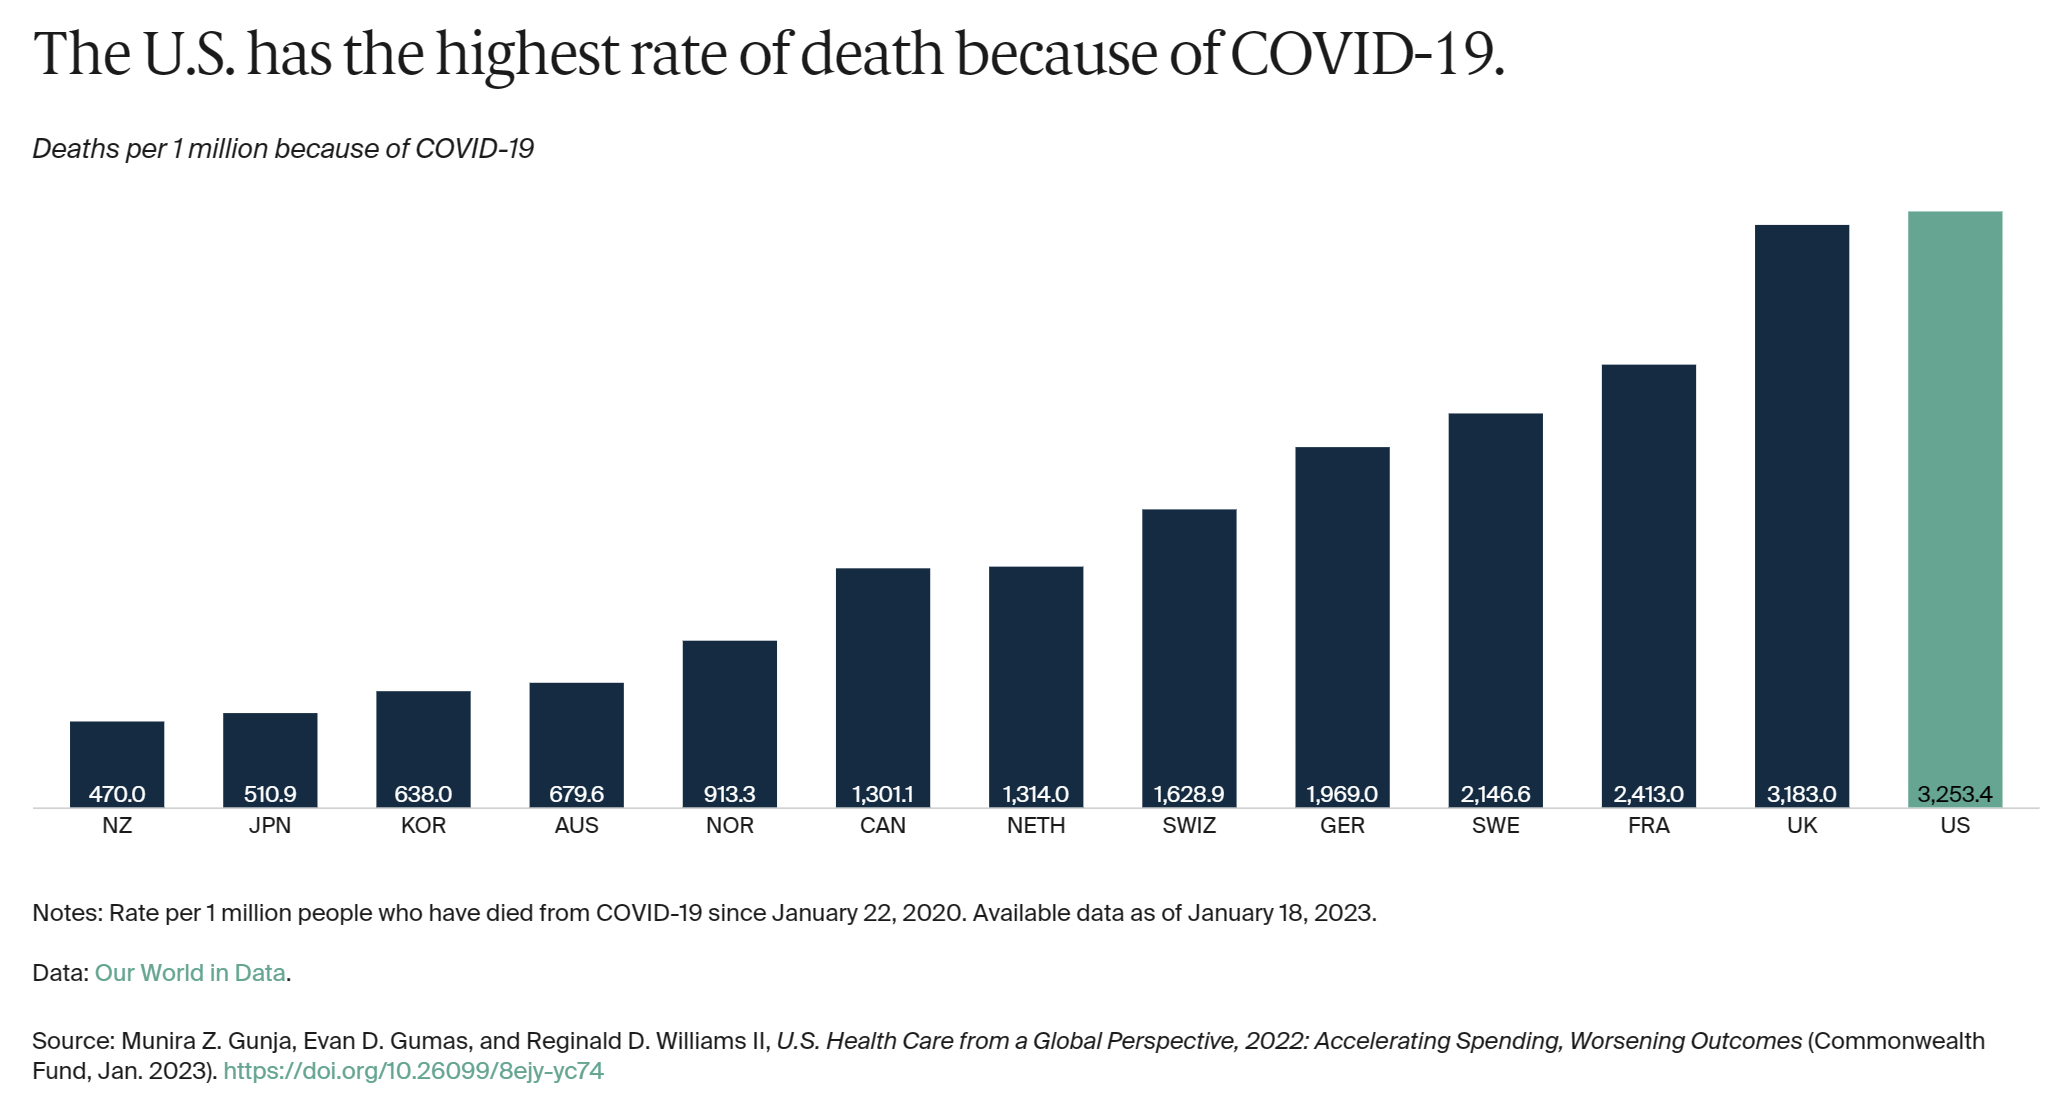 Deaths per 1 million because of COVID-19 in OECD nations, 18 January 2023. The U.S. has the highest rate of death because of COVID-19. Graphic: The Commonwealth Fund